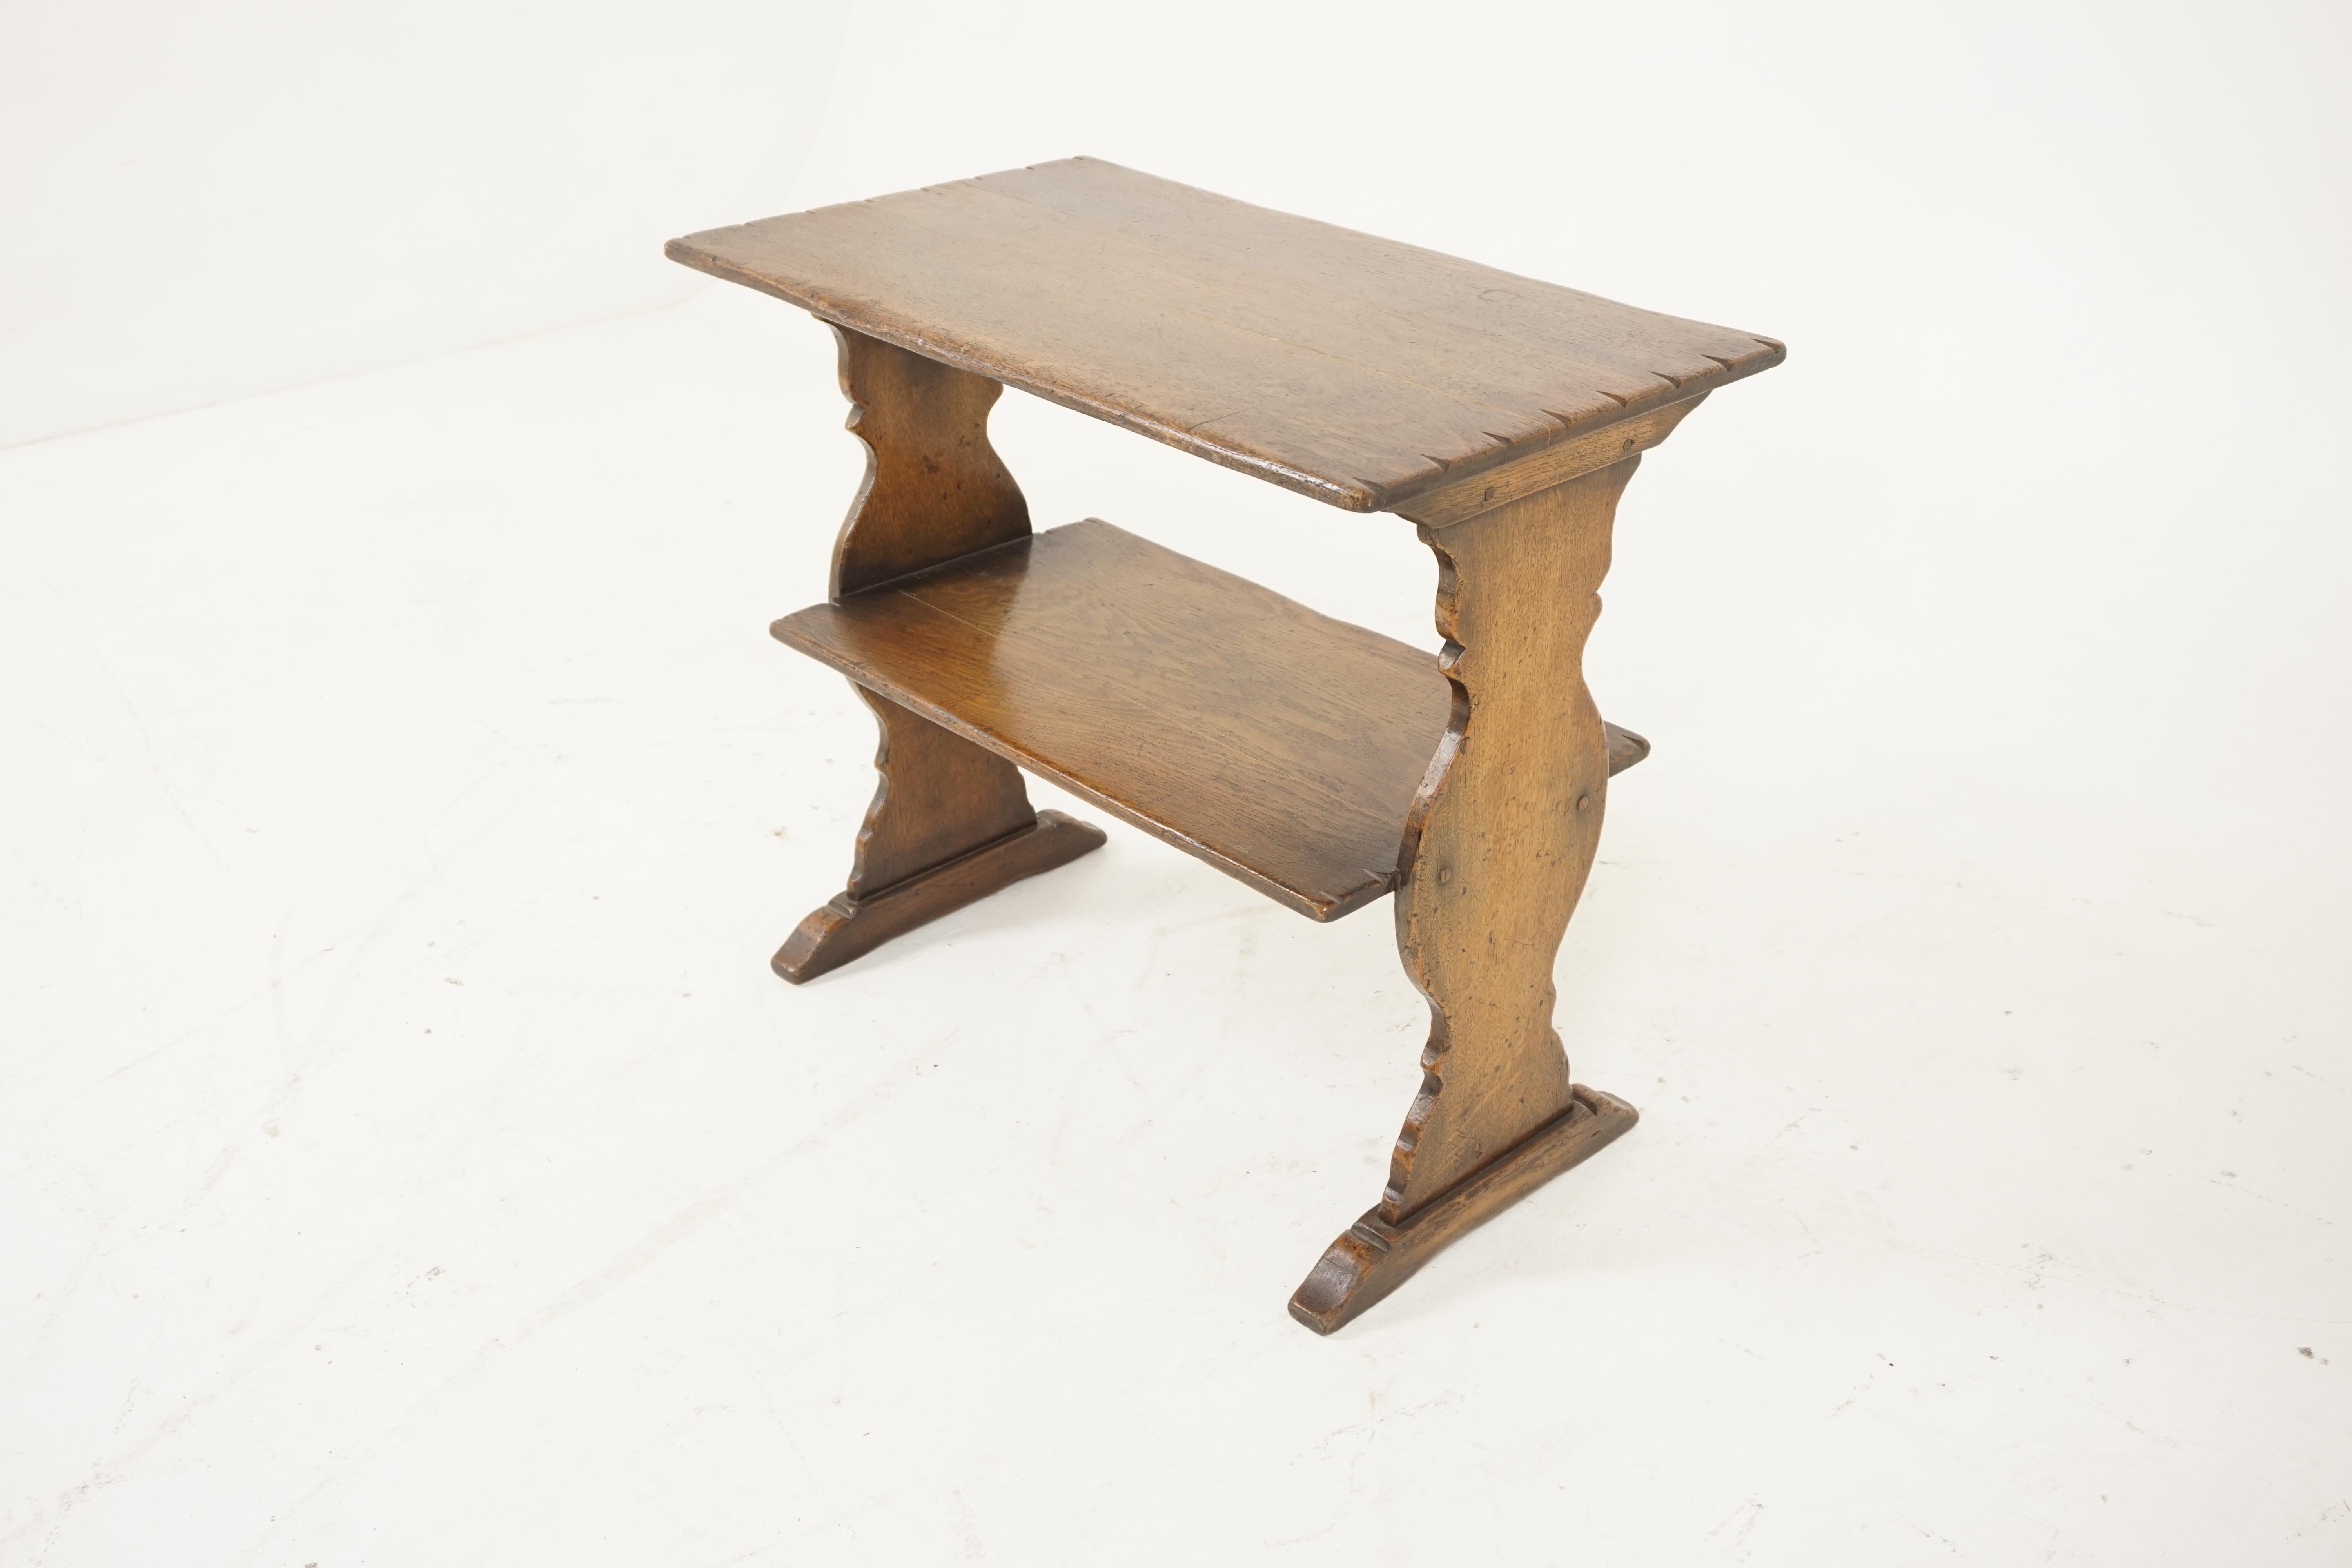 Vintage oak table, two-tiered bookstand, antique furniture, Scotland, 1930

Scotland, 1930Solid oak
Original finish
Rectangular top with cut outs on the ends
Second shelf underneath
Shaped supports on the ends
All standing on a pair of shaped